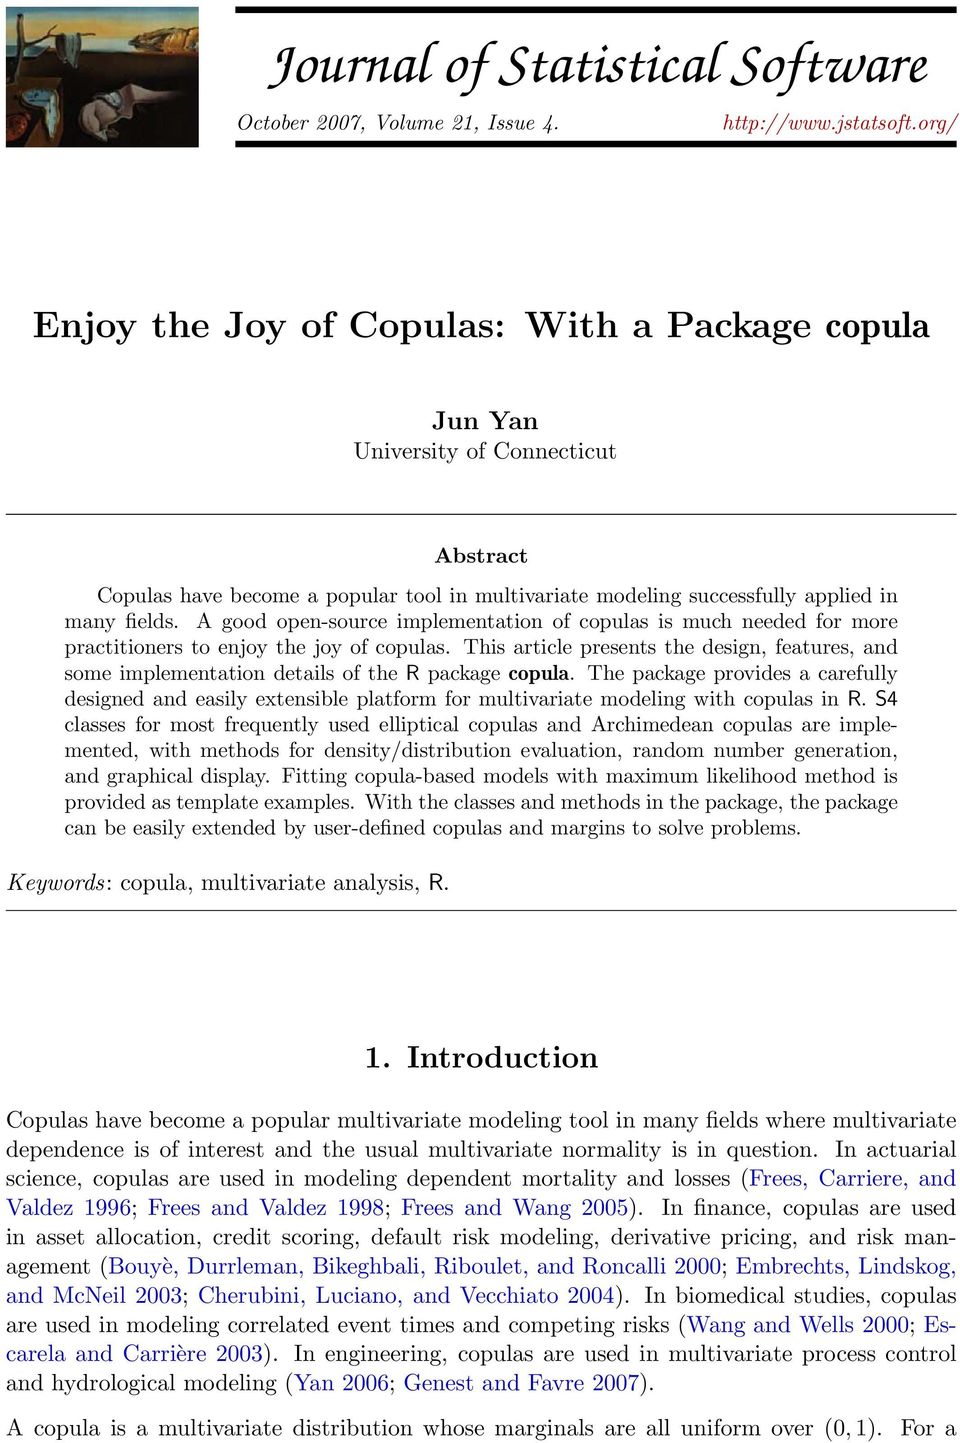 A good open-source implementation of copulas is much needed for more practitioners to enjoy the joy of copulas.